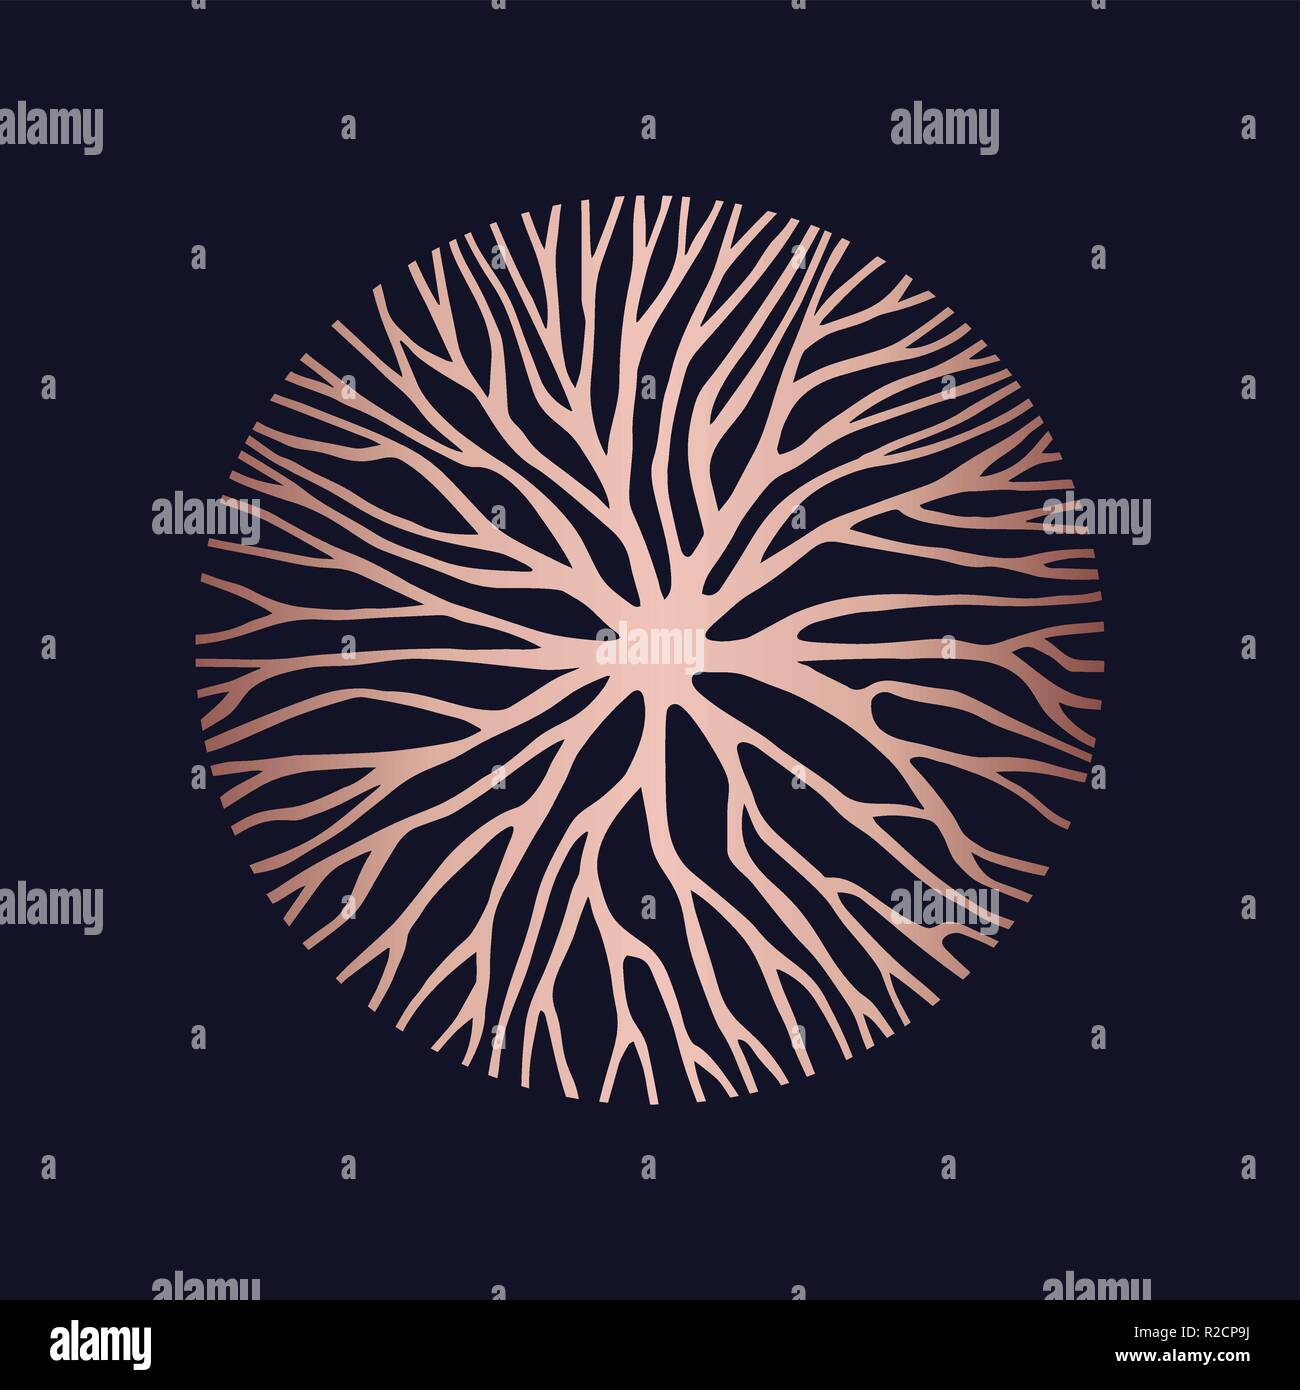 Abstract copper circle shape illustration of tree branches or roots for concept design, creative nature art. Stock Vector